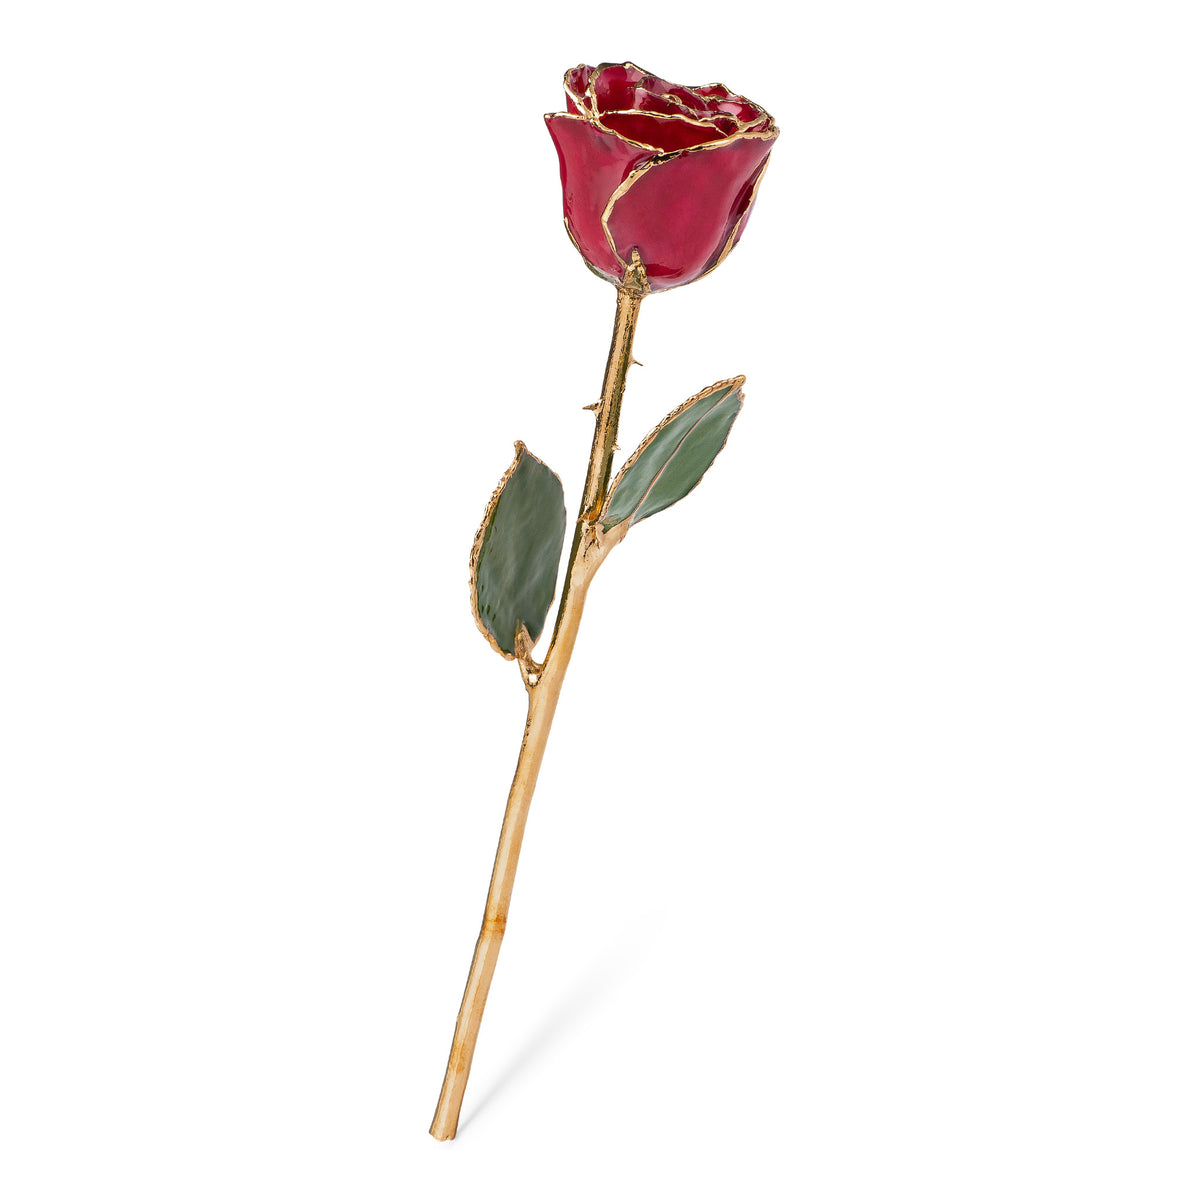 24K Gold Trimmed Forever Rose with Deep Red Burgundy Petals with View of Stem, Leaves, and Rose Petals and Showing Detail of Gold Trim